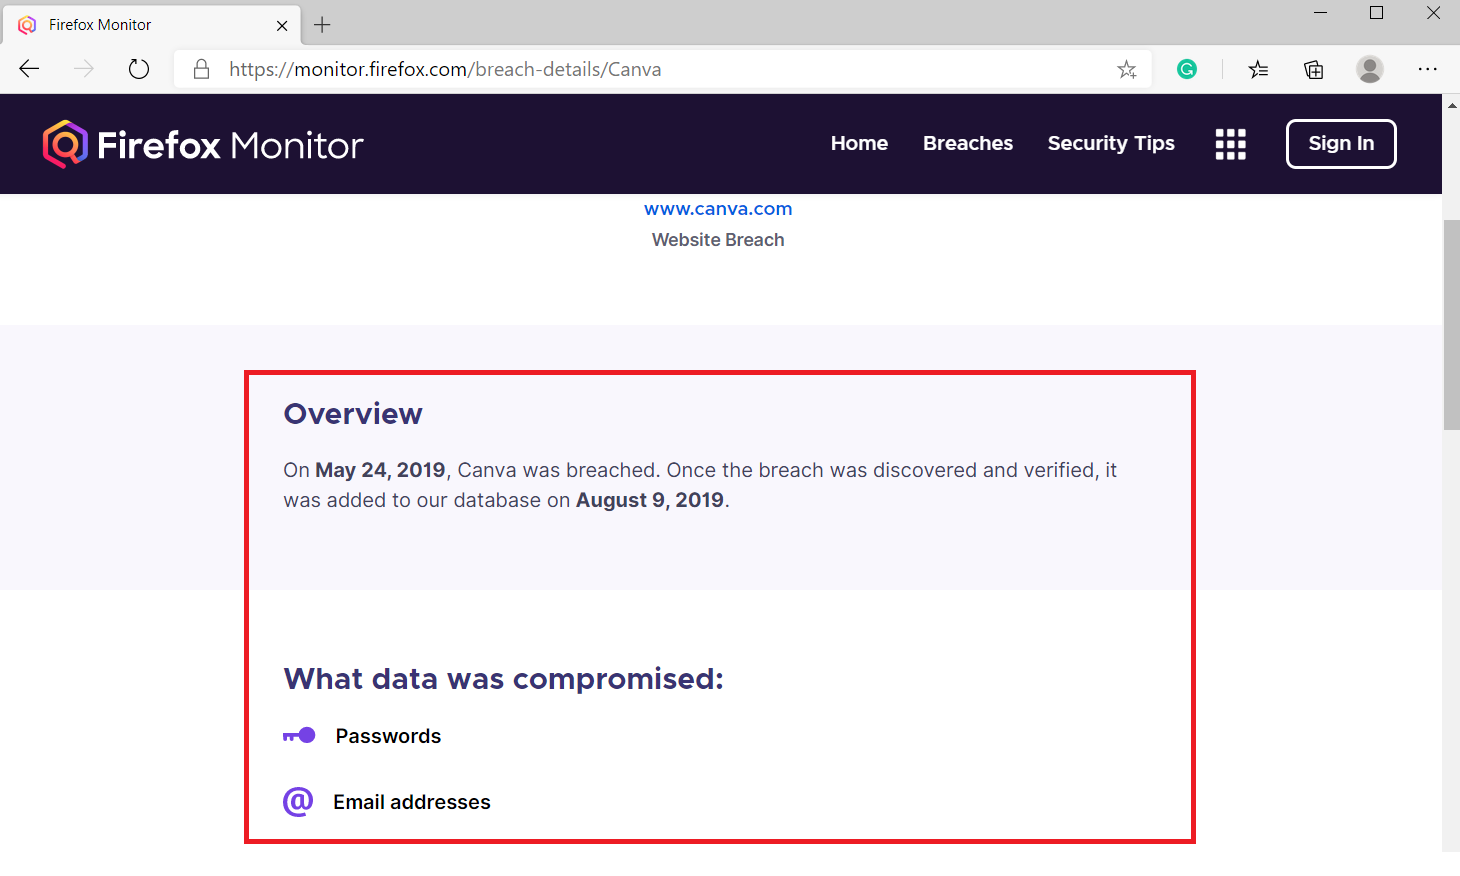 compromised data in Firefox Monitor